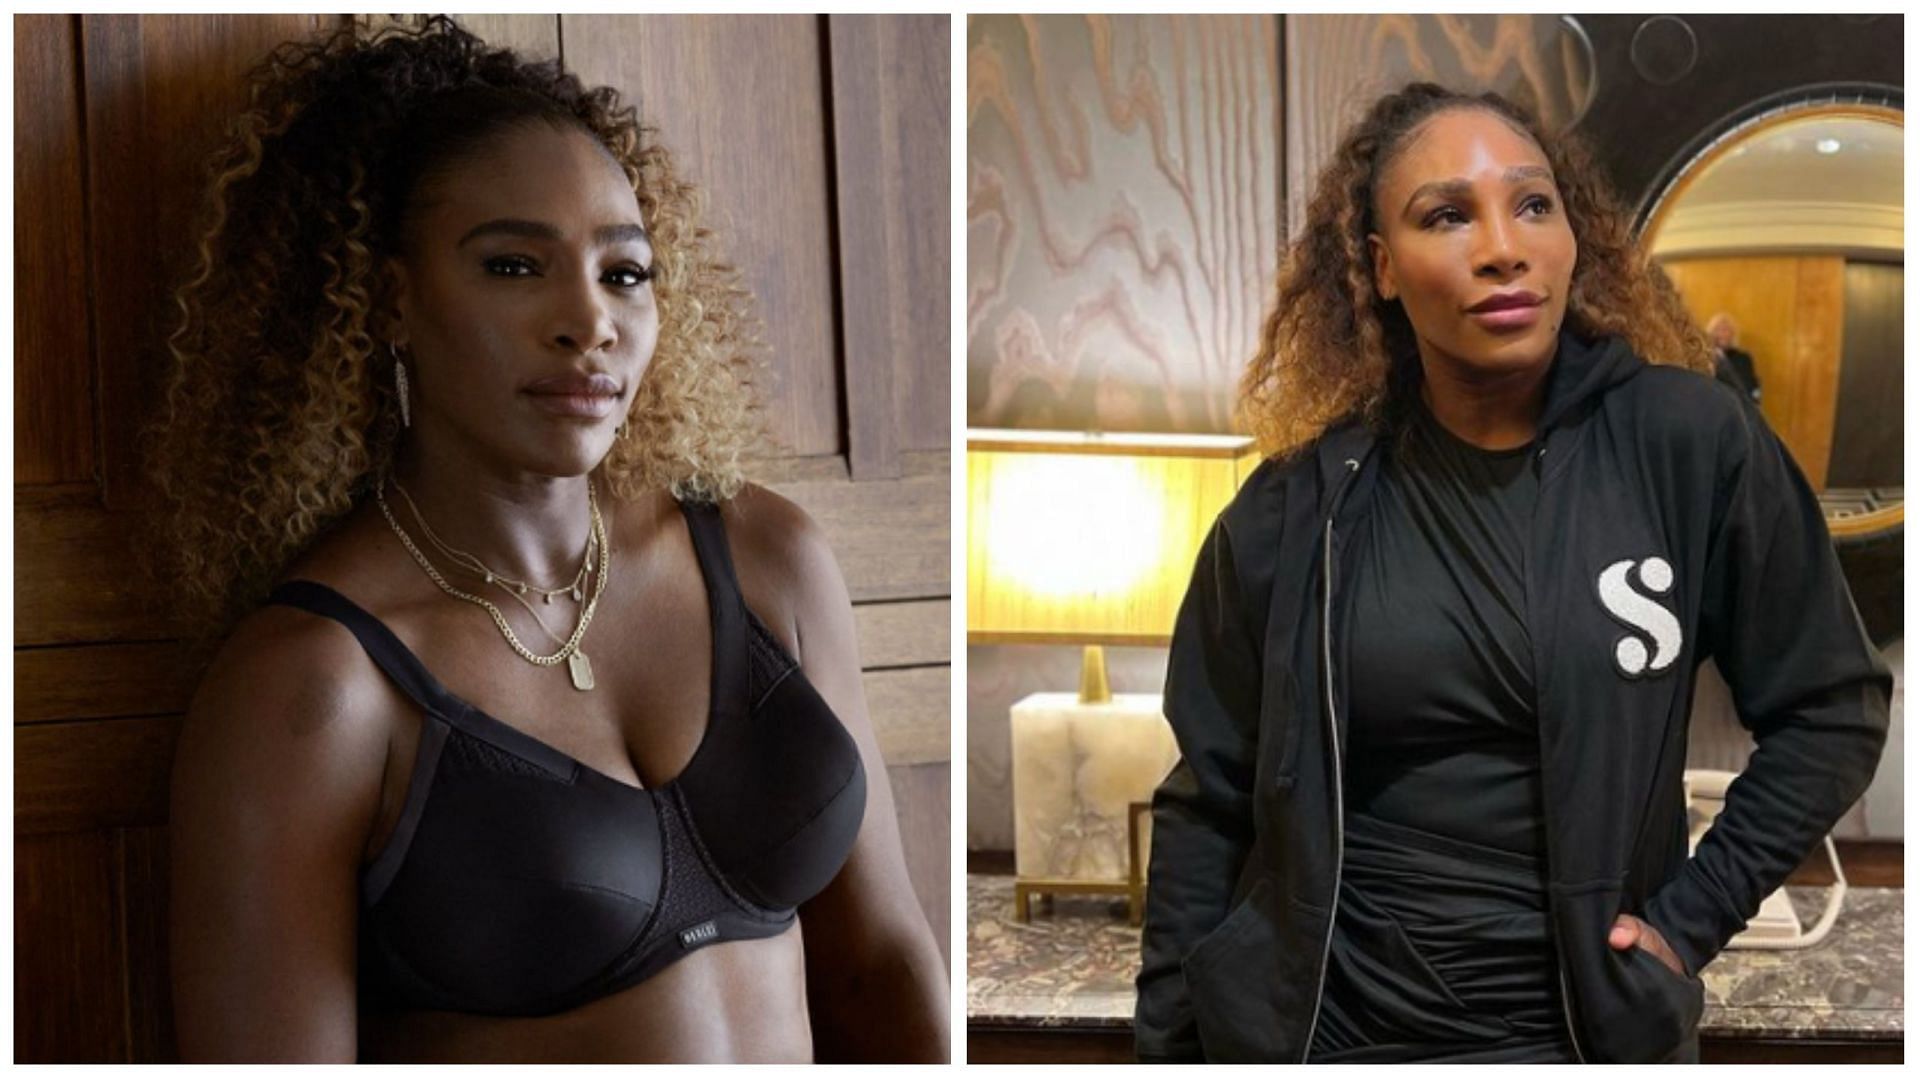 How Serena Williams Stays Strong with At-Home Workouts and Vegan Diet?